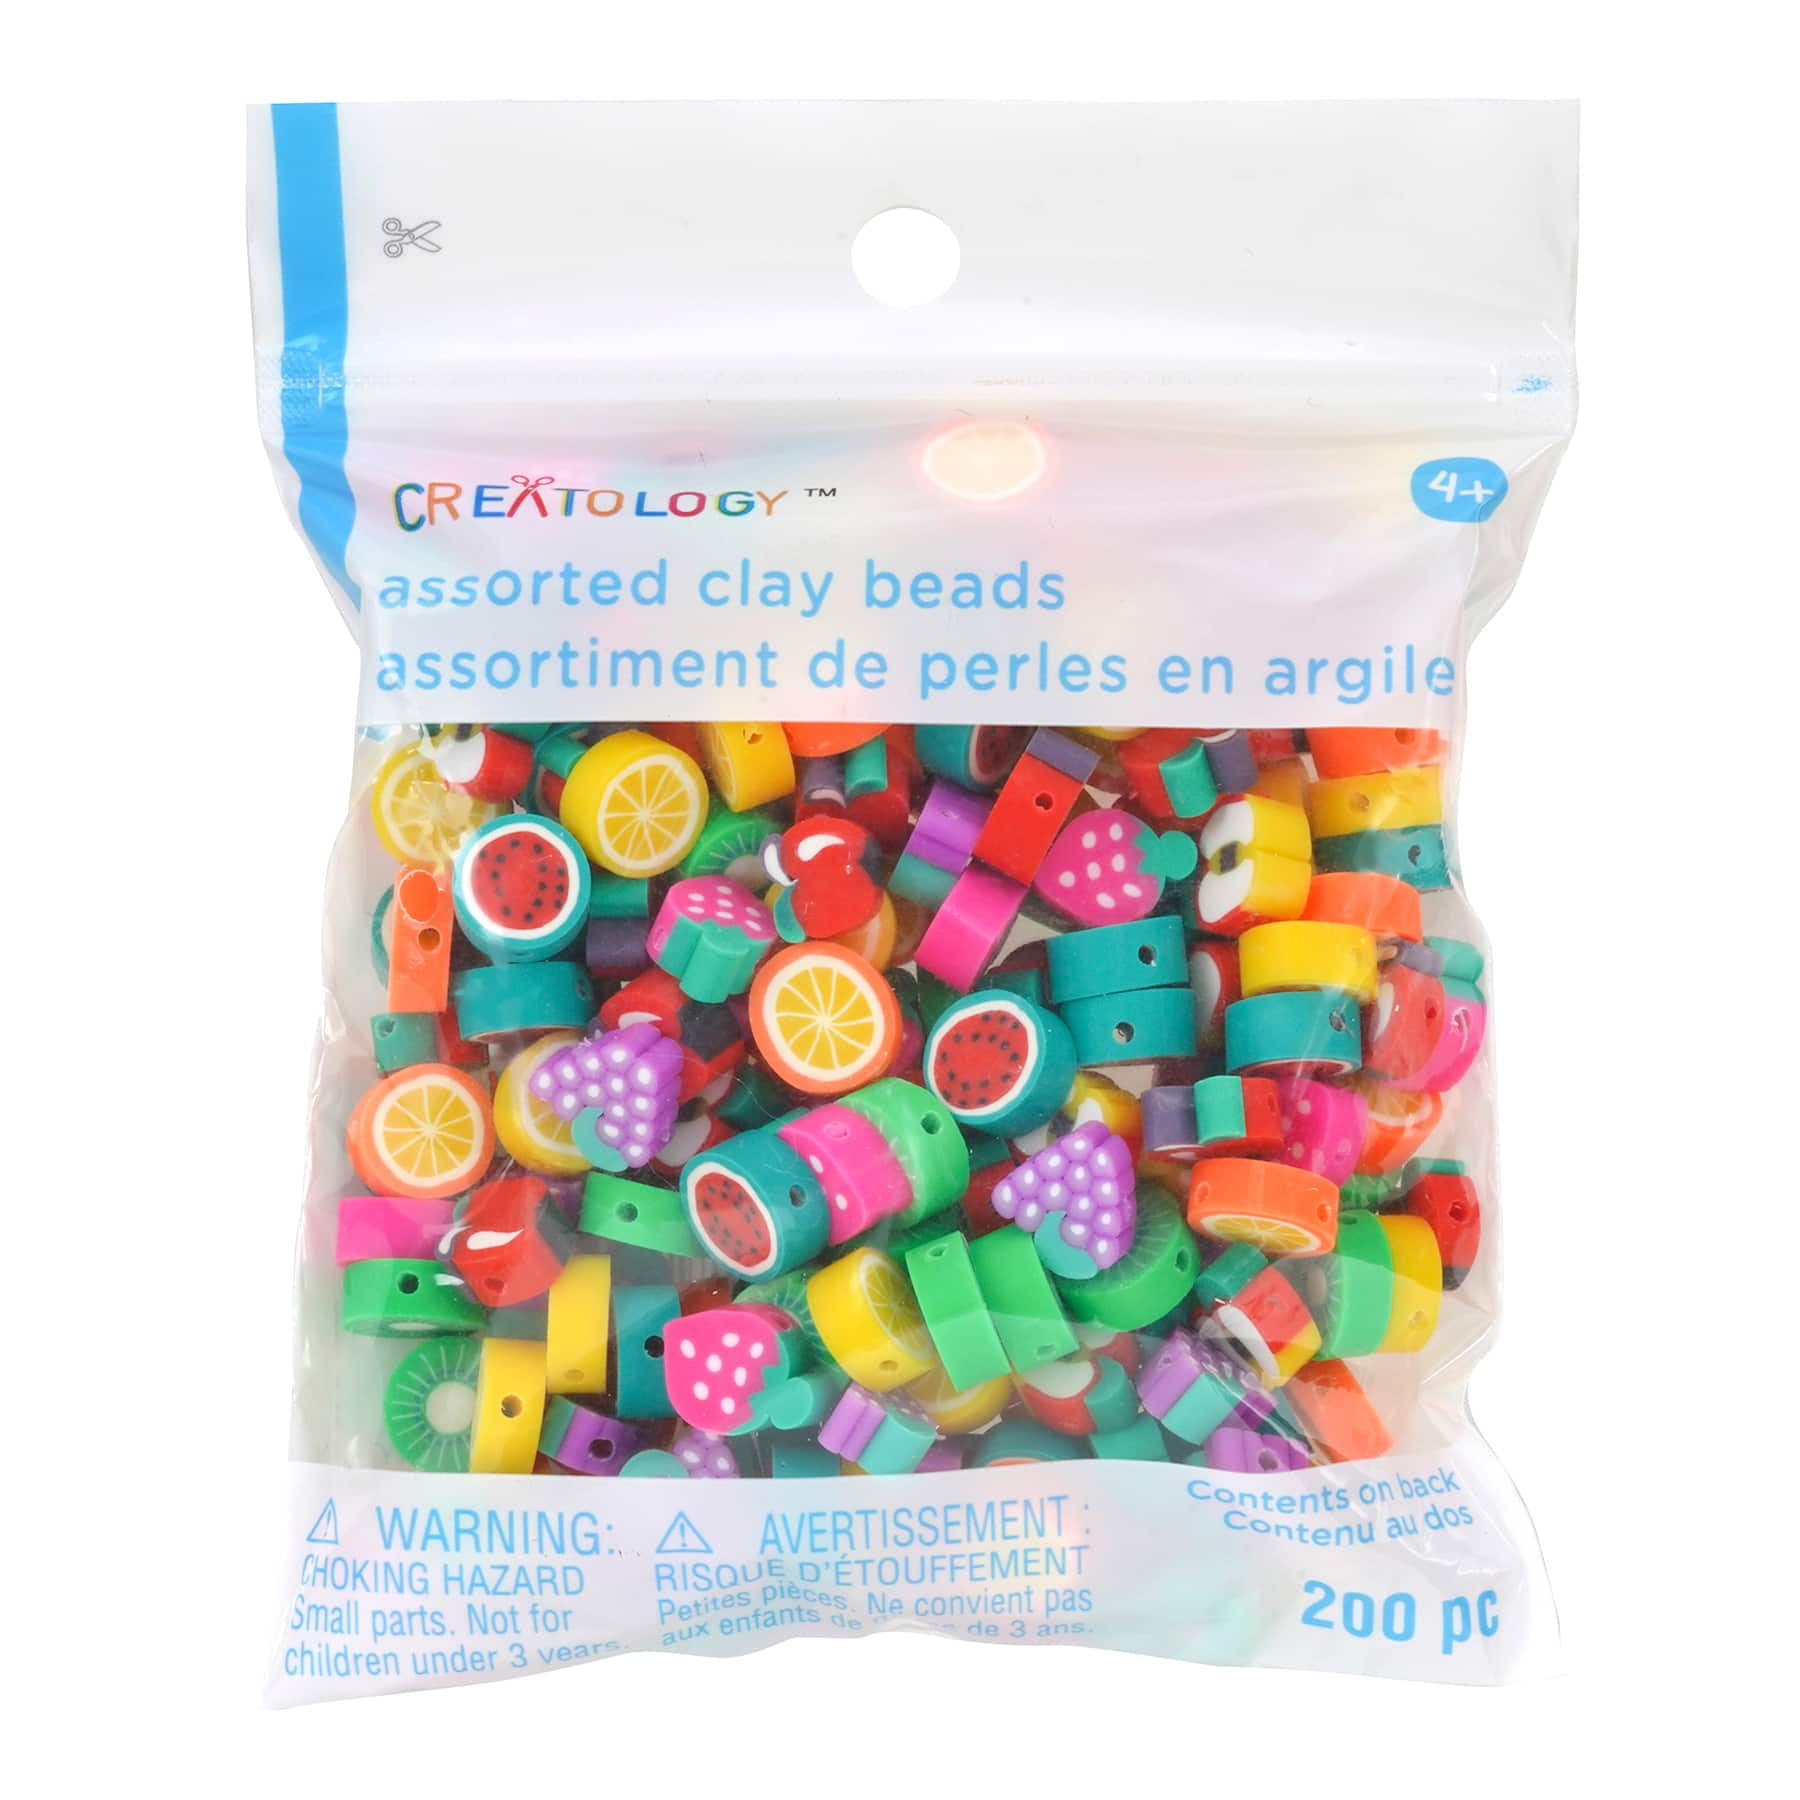 refill and restock clay beads and beads｜TikTok Search